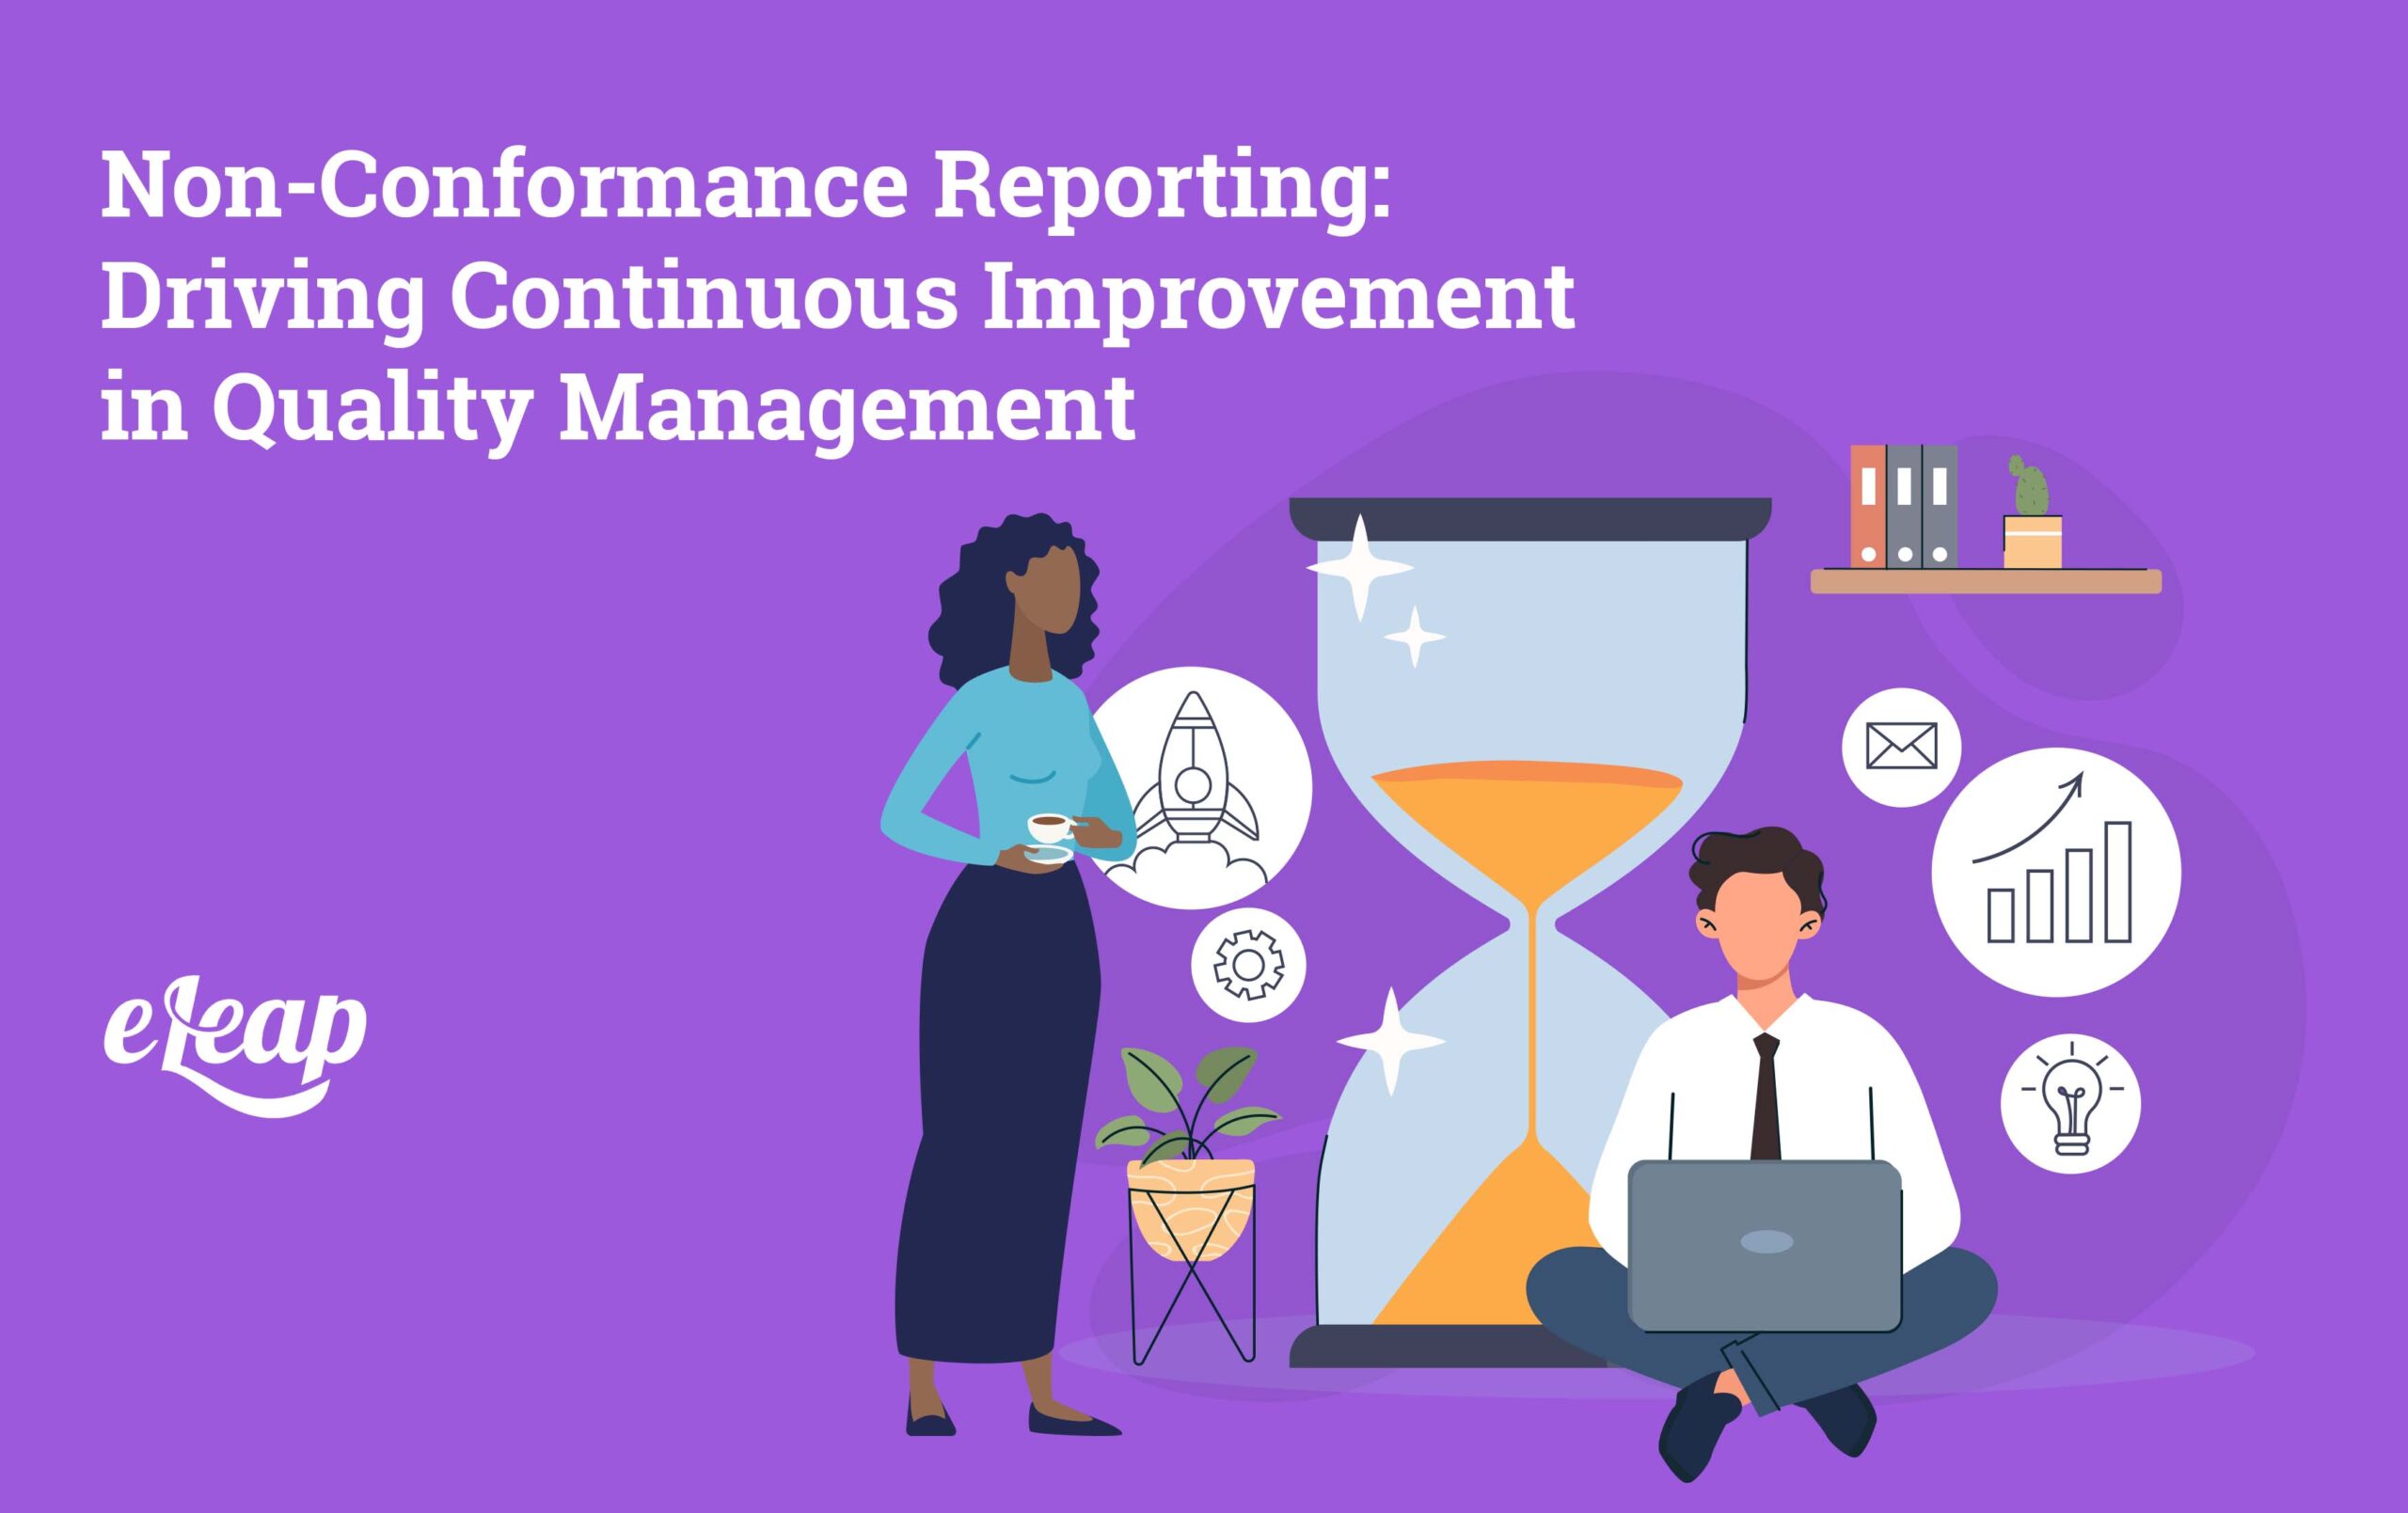 Nonconformance Reporting: Driving Continuous Improvement in Quality Management